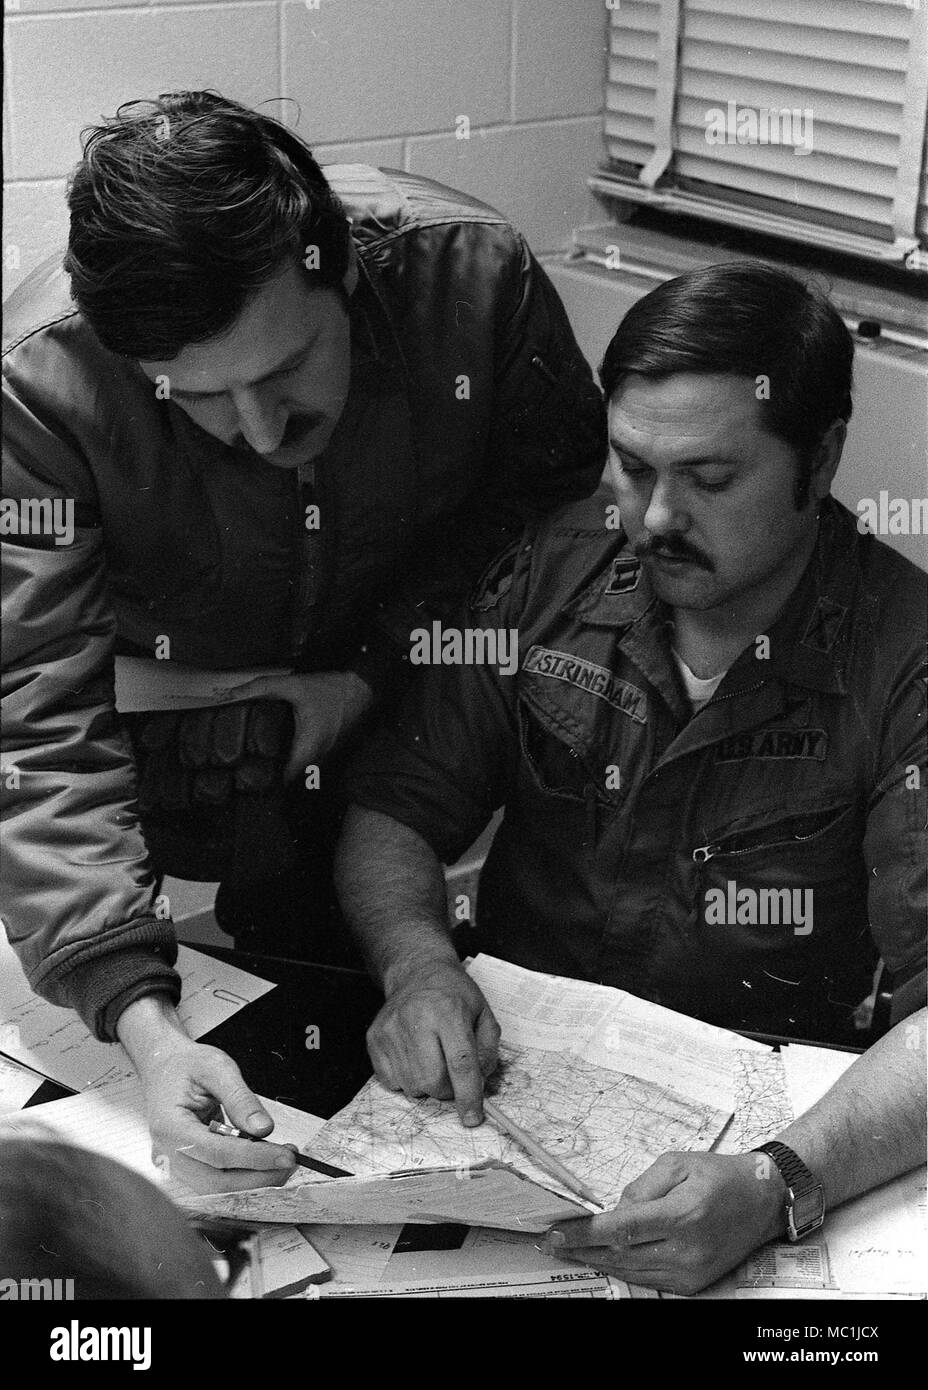 Capt. Lawrence Hays (from left), Troop N, 107th Armored Cavalry, and Capt. Roy Stringham, 54th Support Center, plan flight operations from the Toledo Air National Guard base during the “Blizzard of ’78.” Ohio National Guard helicopter crews worked around the clock on medevac, rescue and resupply missions, averaging more than 200 flights a day during the peak period. (Ohio Army National Guard Historical Collections) Stock Photo